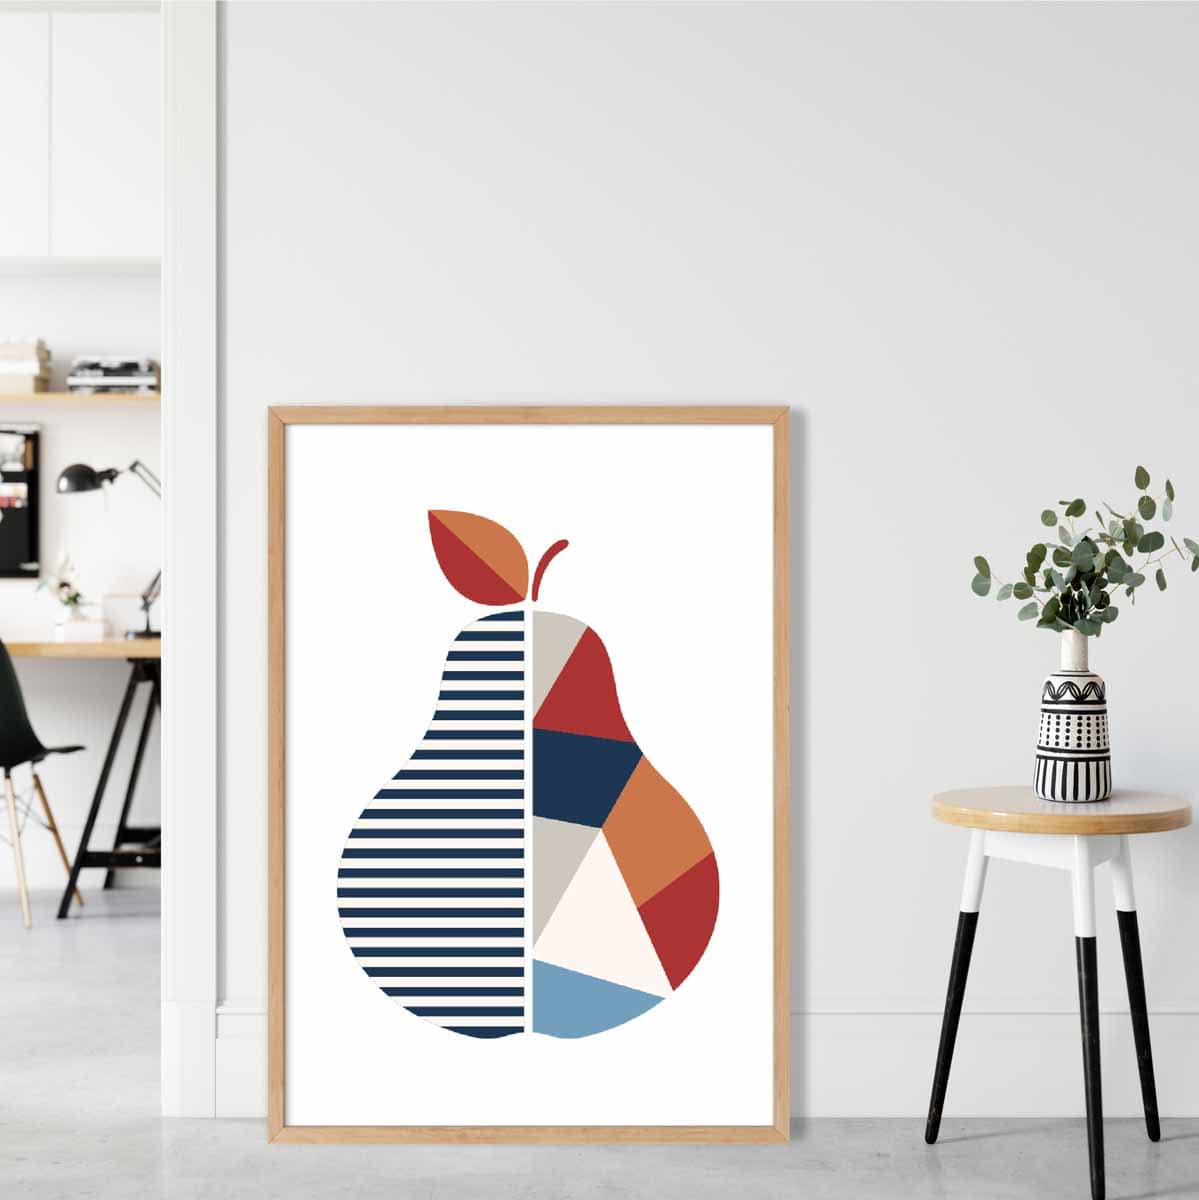 Geometric Fruit Poster of a Pear in Red Orange Blue